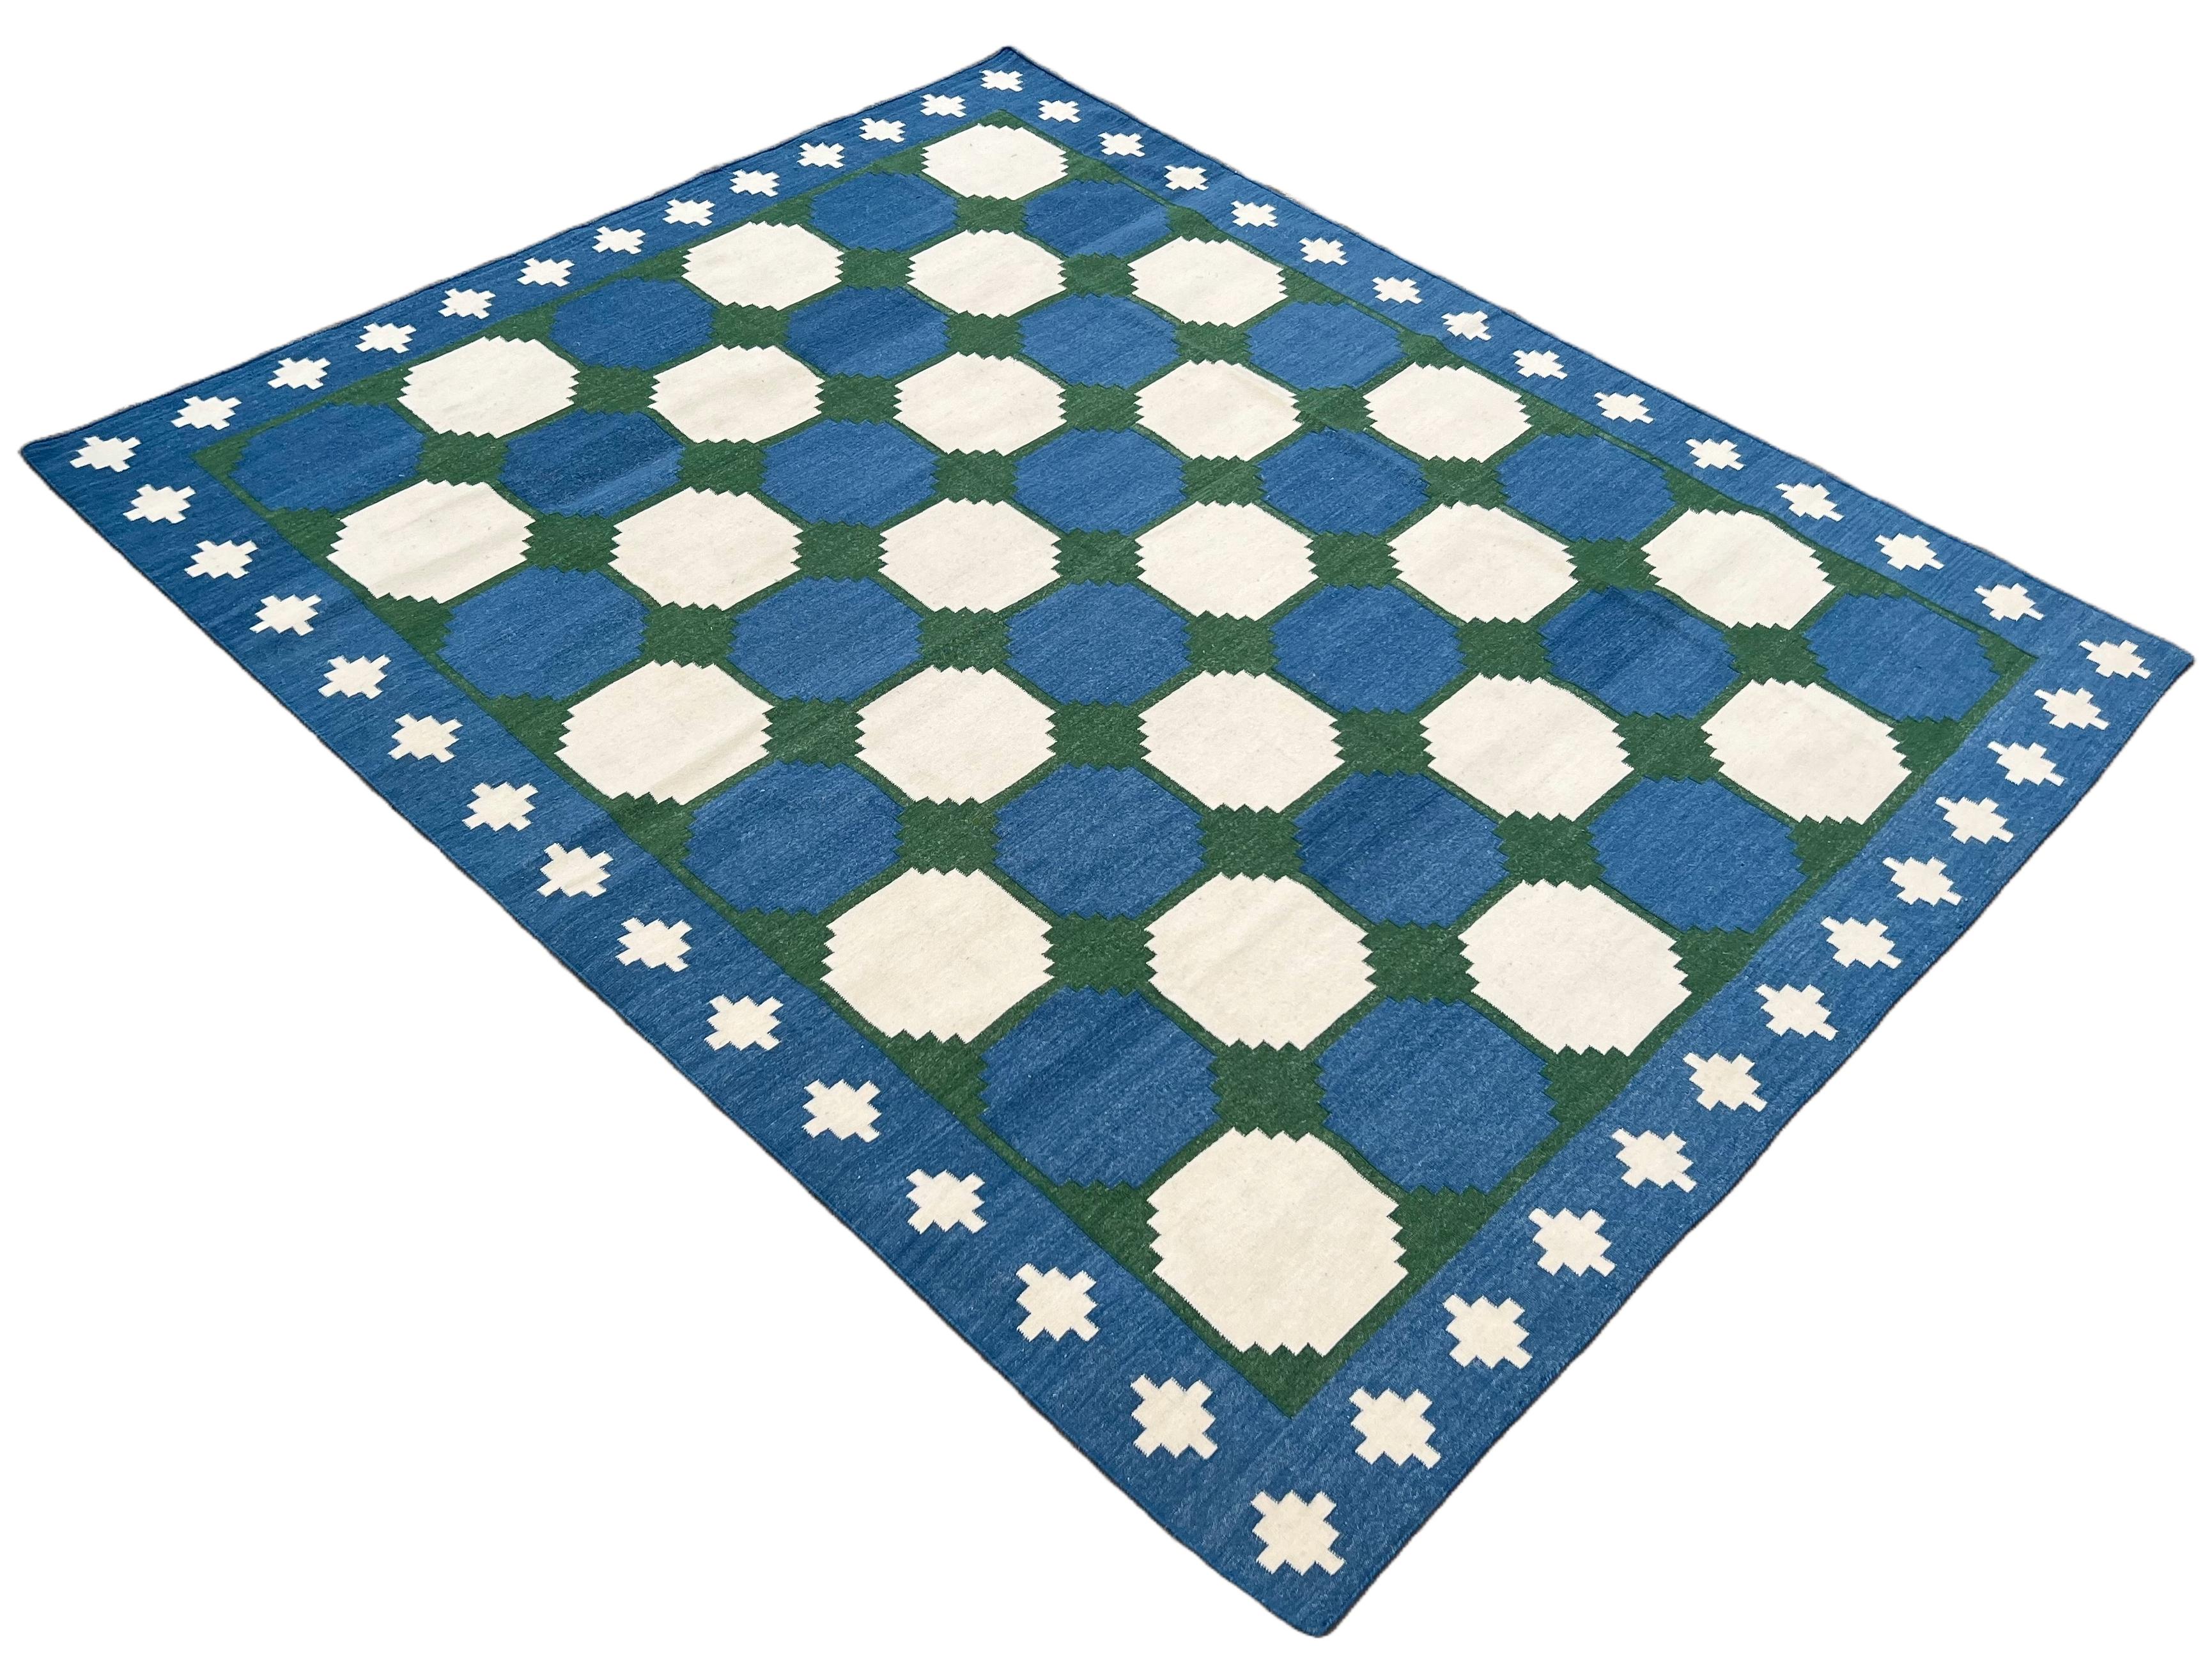 Handmade New Zealand Wool Vegetable Dyed Blue, Cream And Green Tile Patterned Indian Rug - 8'x10'
These special flat-weave dhurries are hand-woven with 15 ply 100% cotton yarn. Due to the special manufacturing techniques used to create our rugs, the